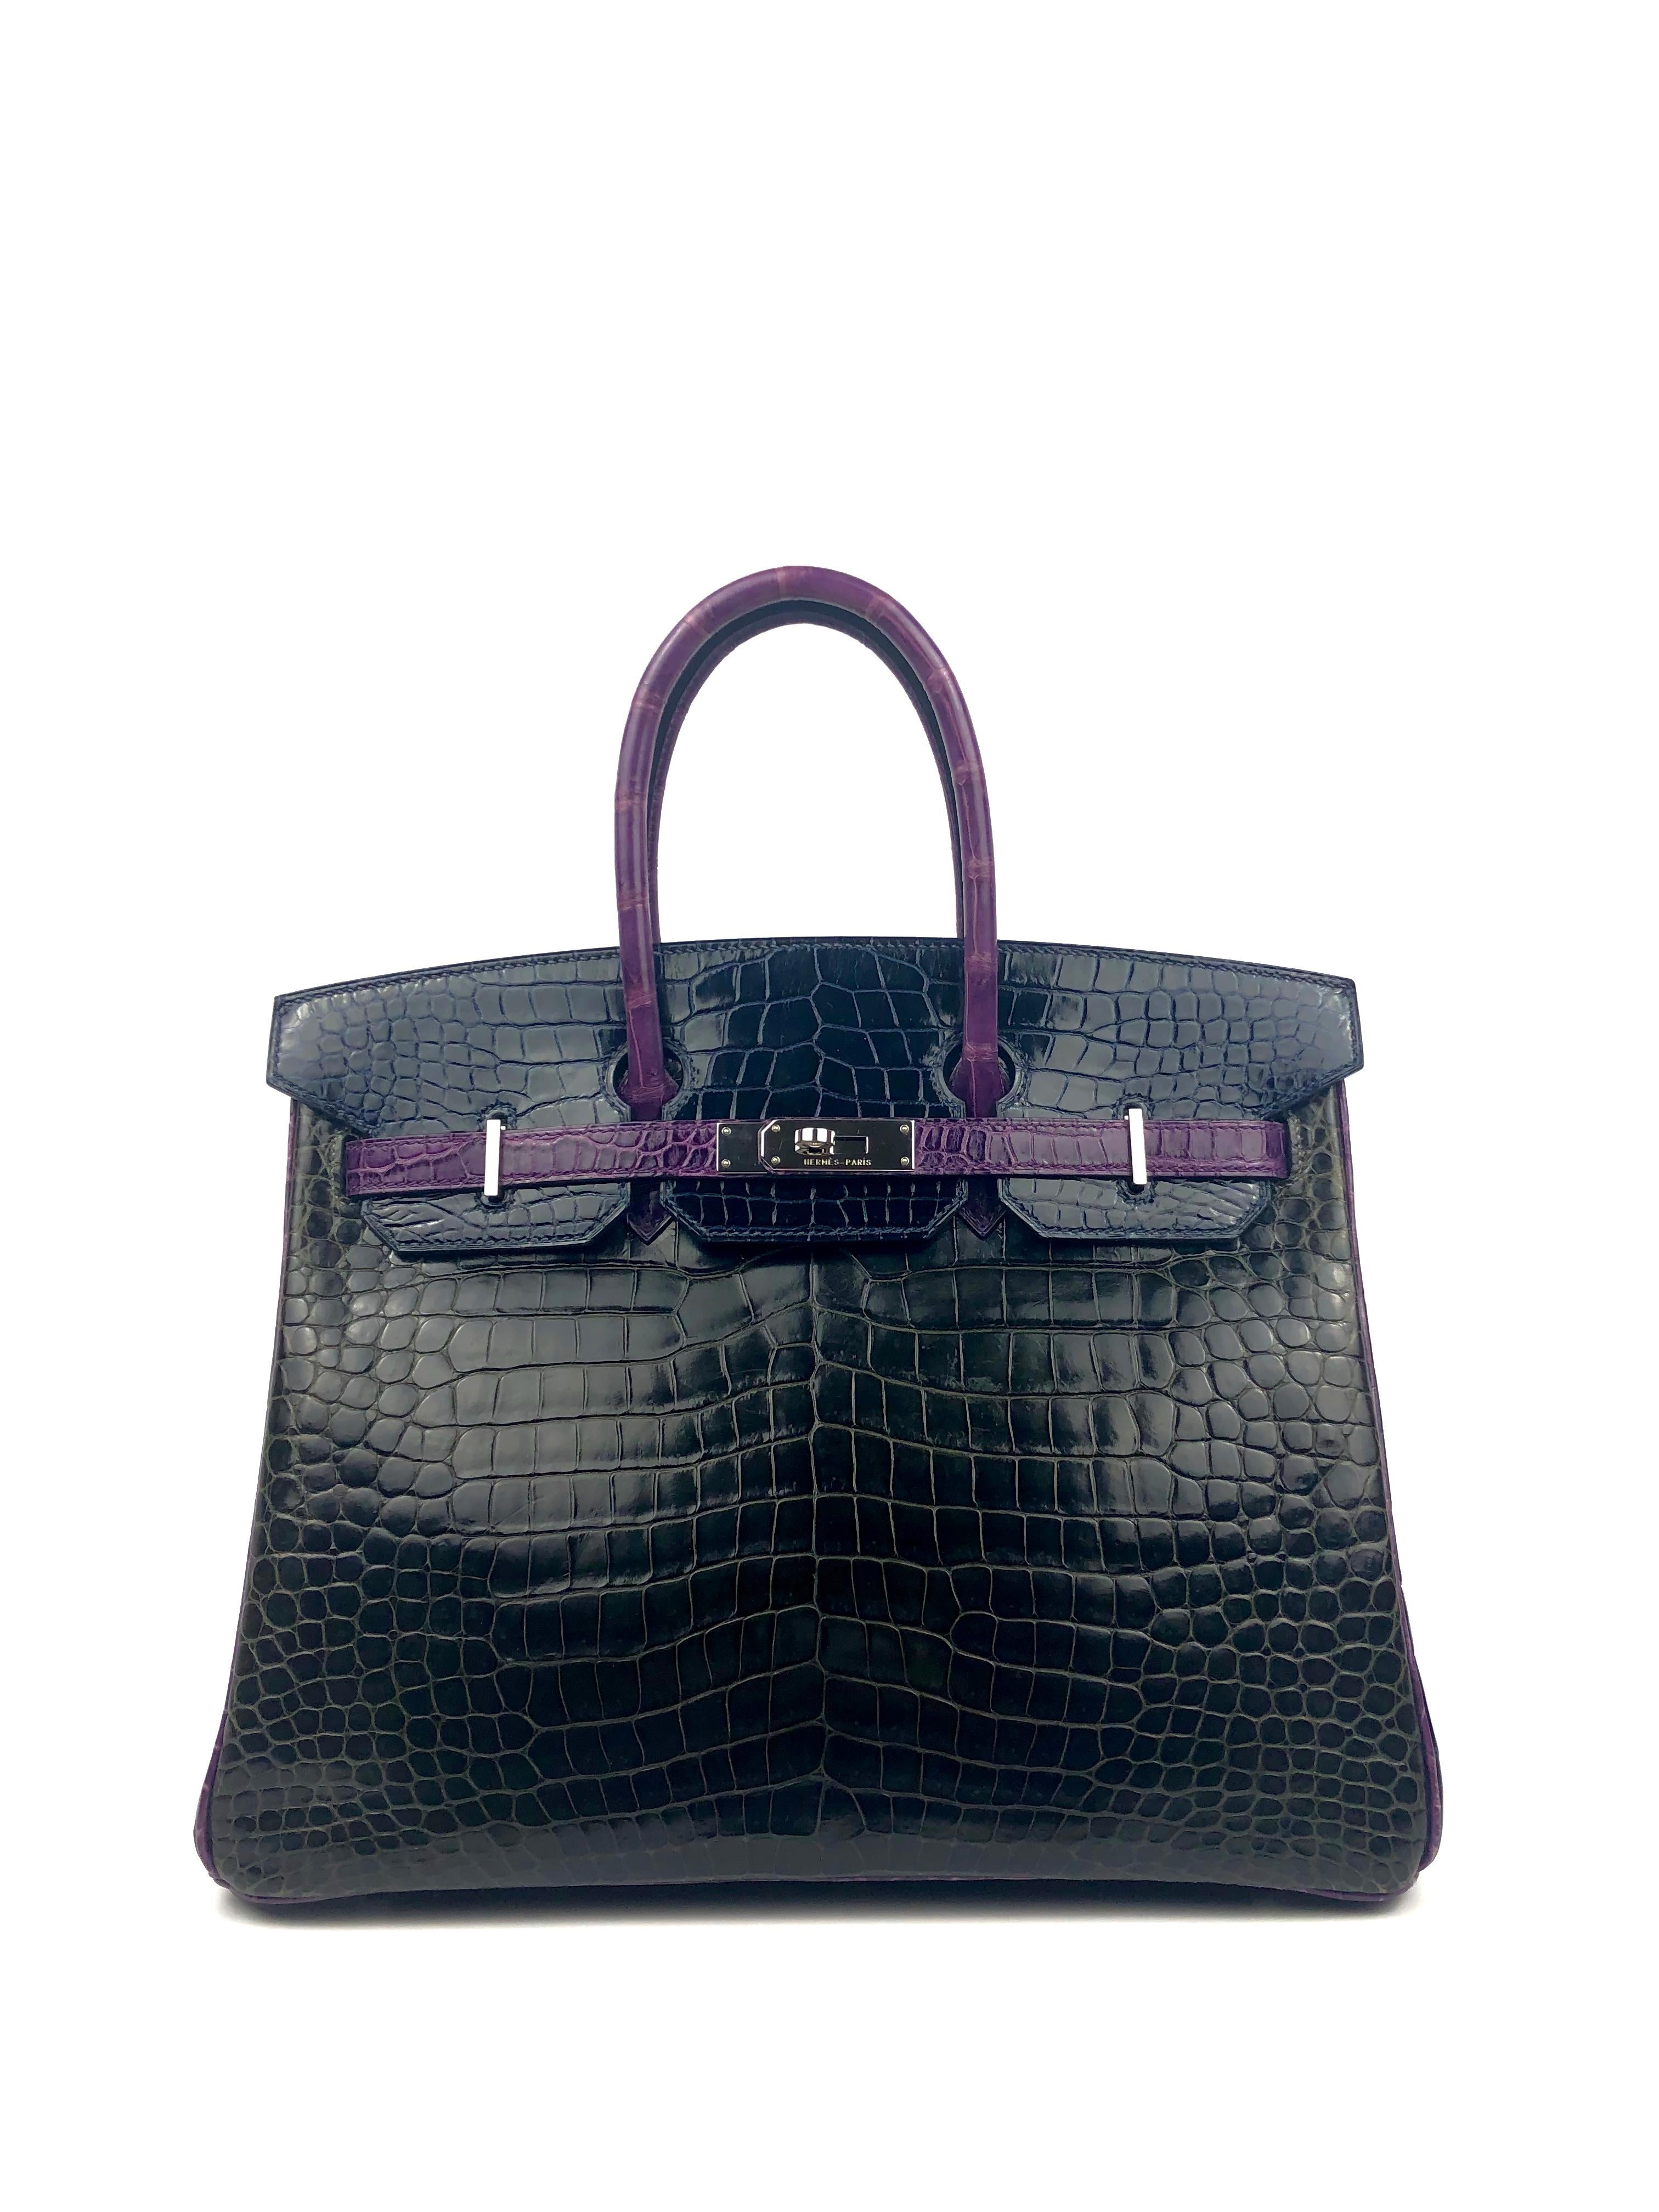 Hermes Birkin 35 HSS Special Oder Tri Color Graphite Blue Marine Violet Crocodile. Excellent Condition Light Hairlines on Hardware some water marketing nothing major or highly noticeable. With Hermès Spa bag would be almost as new. Best Price